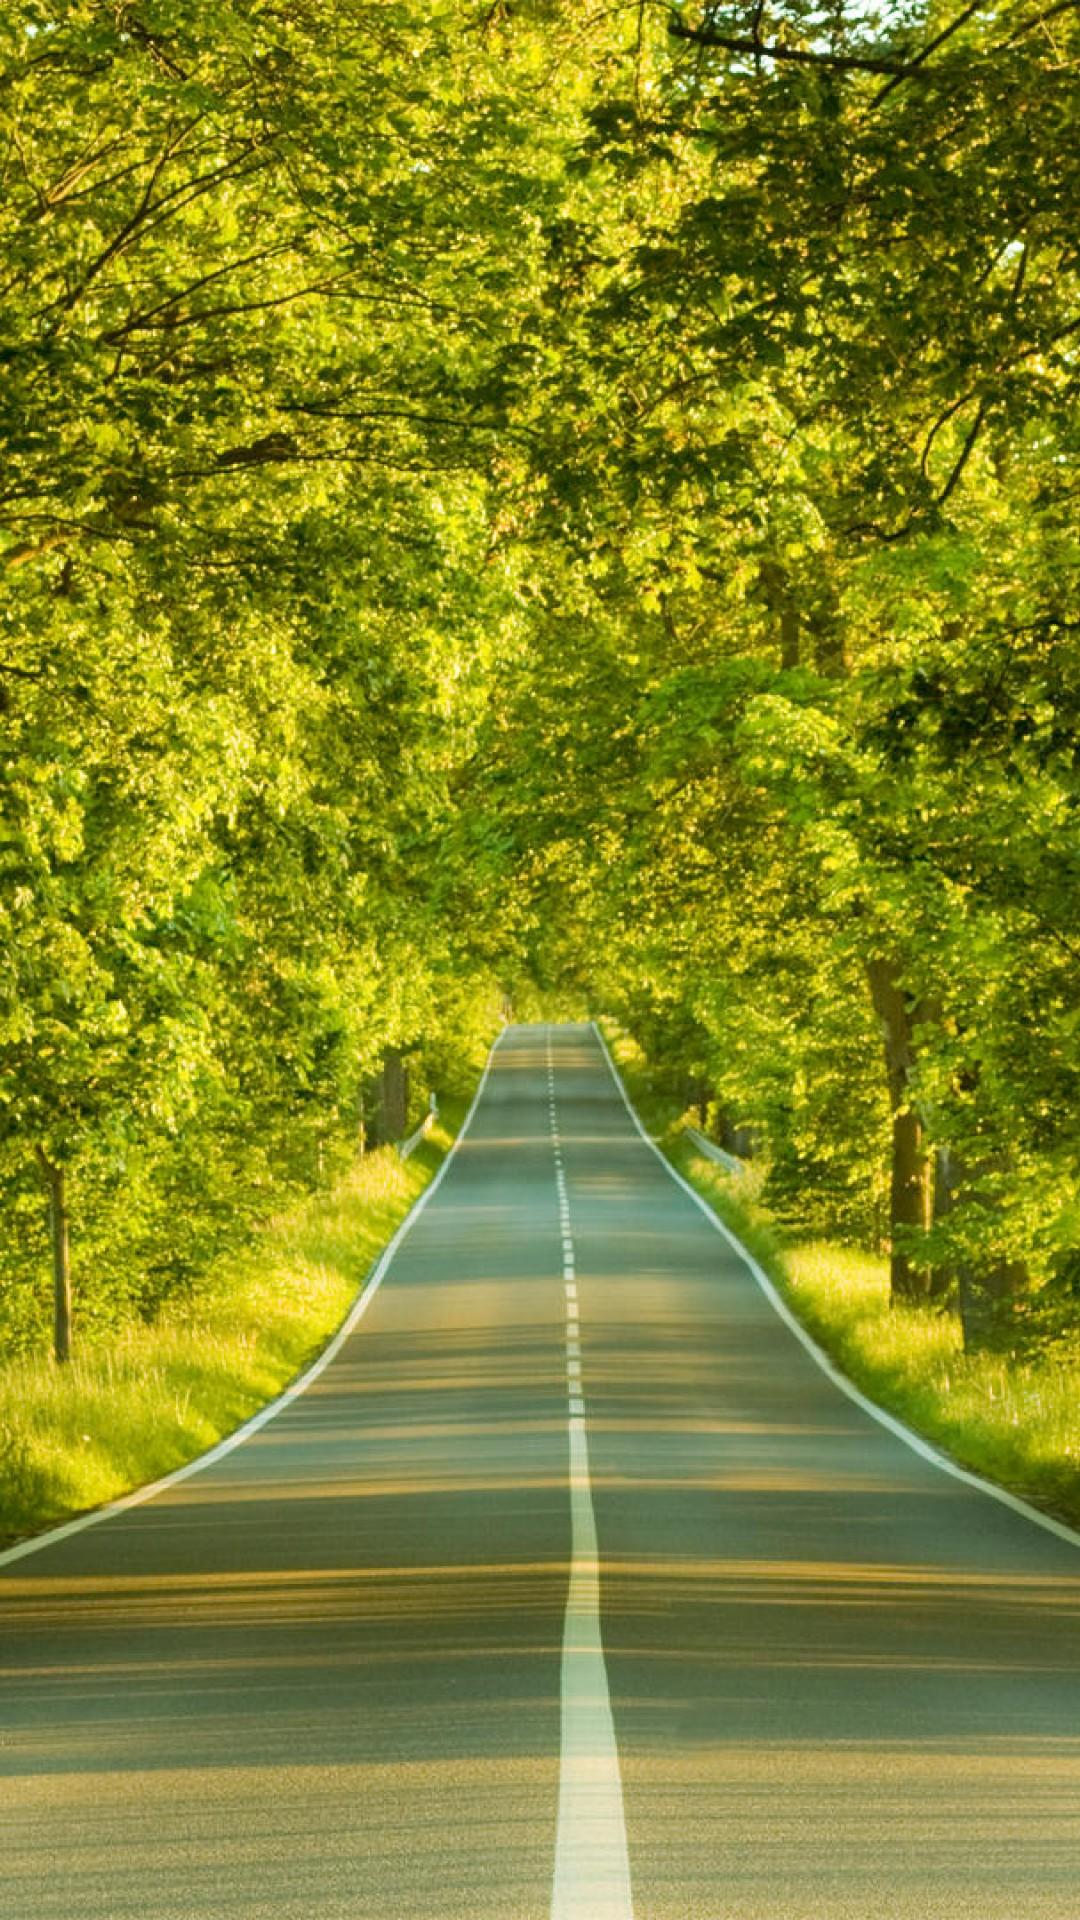 Clear Road Nature iPhone 6 / 6S Plus Wallpaper